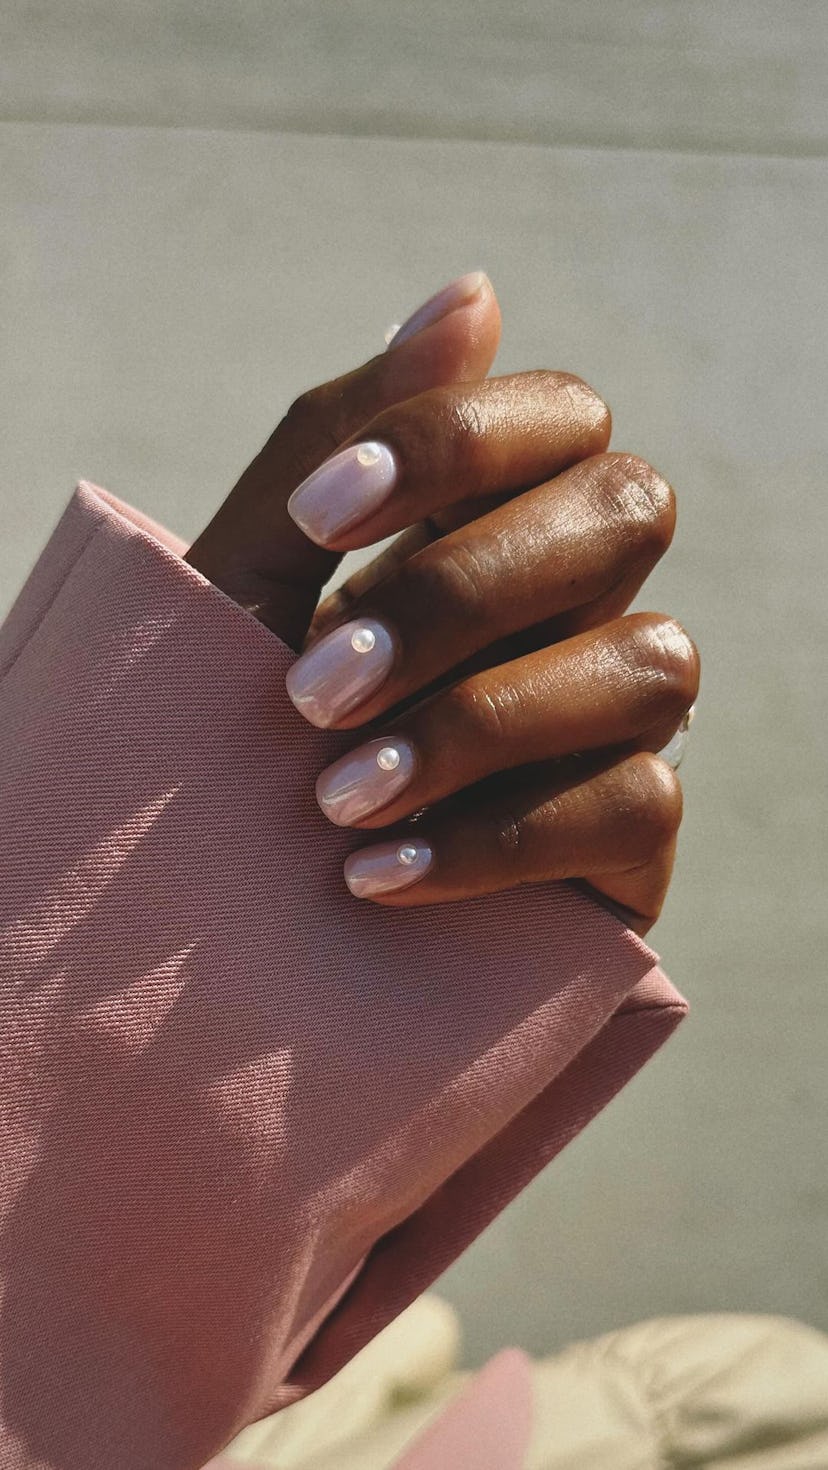 Try pink chrome nails with pearl details for virgo season 2023.